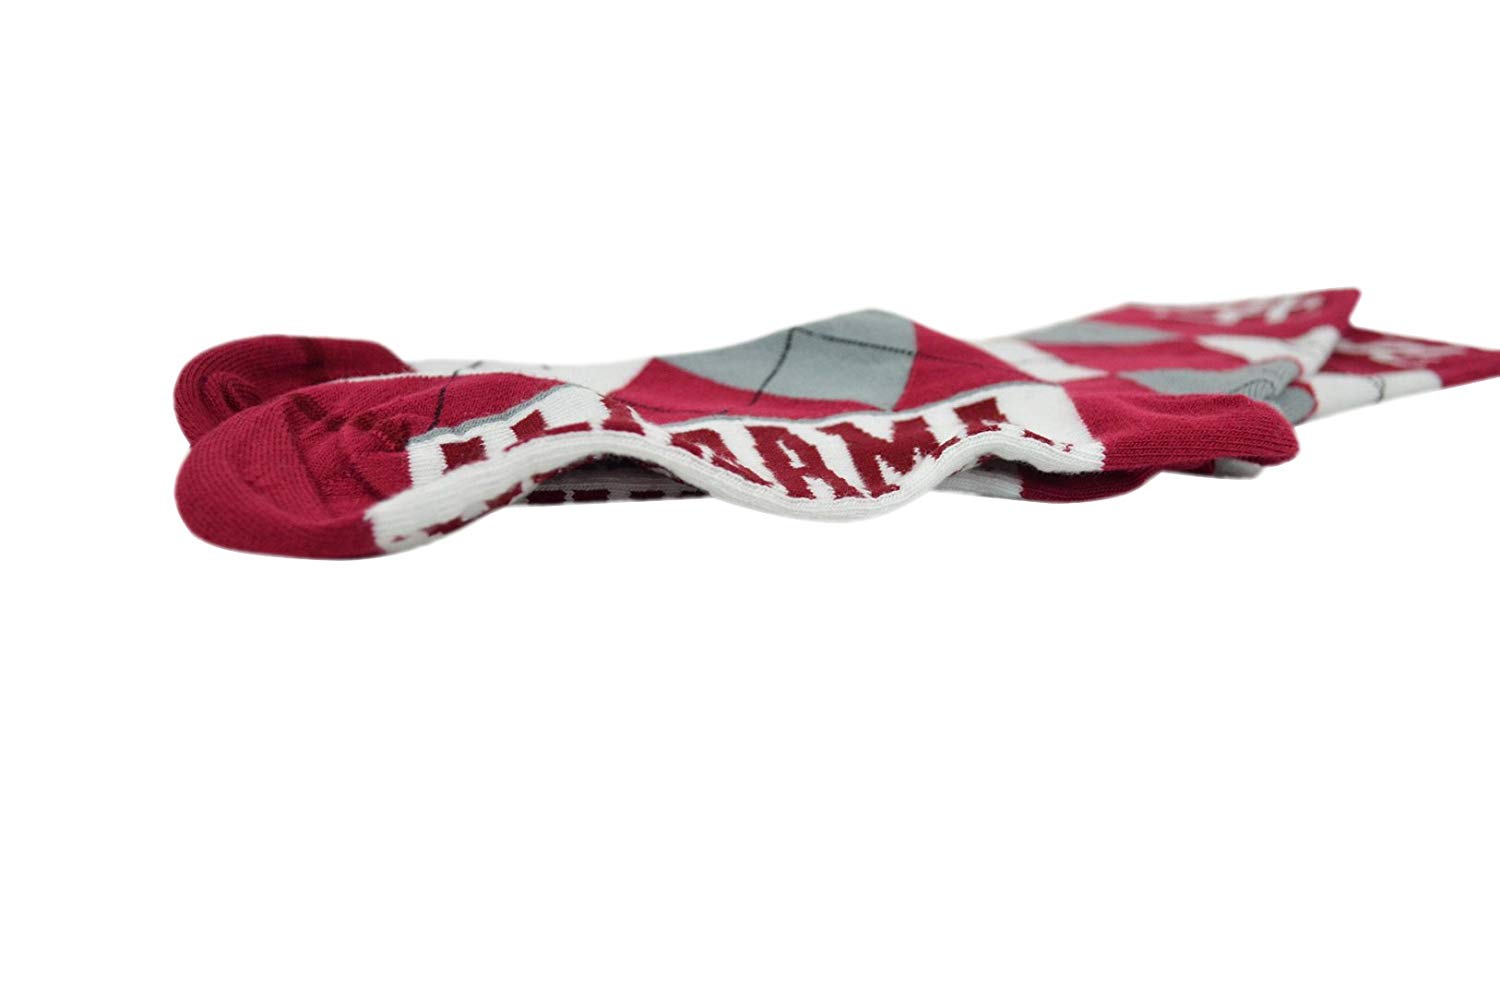 NCAA Collegiate Fan Shop Authentic NCAA 2-pack Large (10/13) Argyle Socks. Show School Pride At Home, Tailgating or a Game. Great addition to your on school gear.